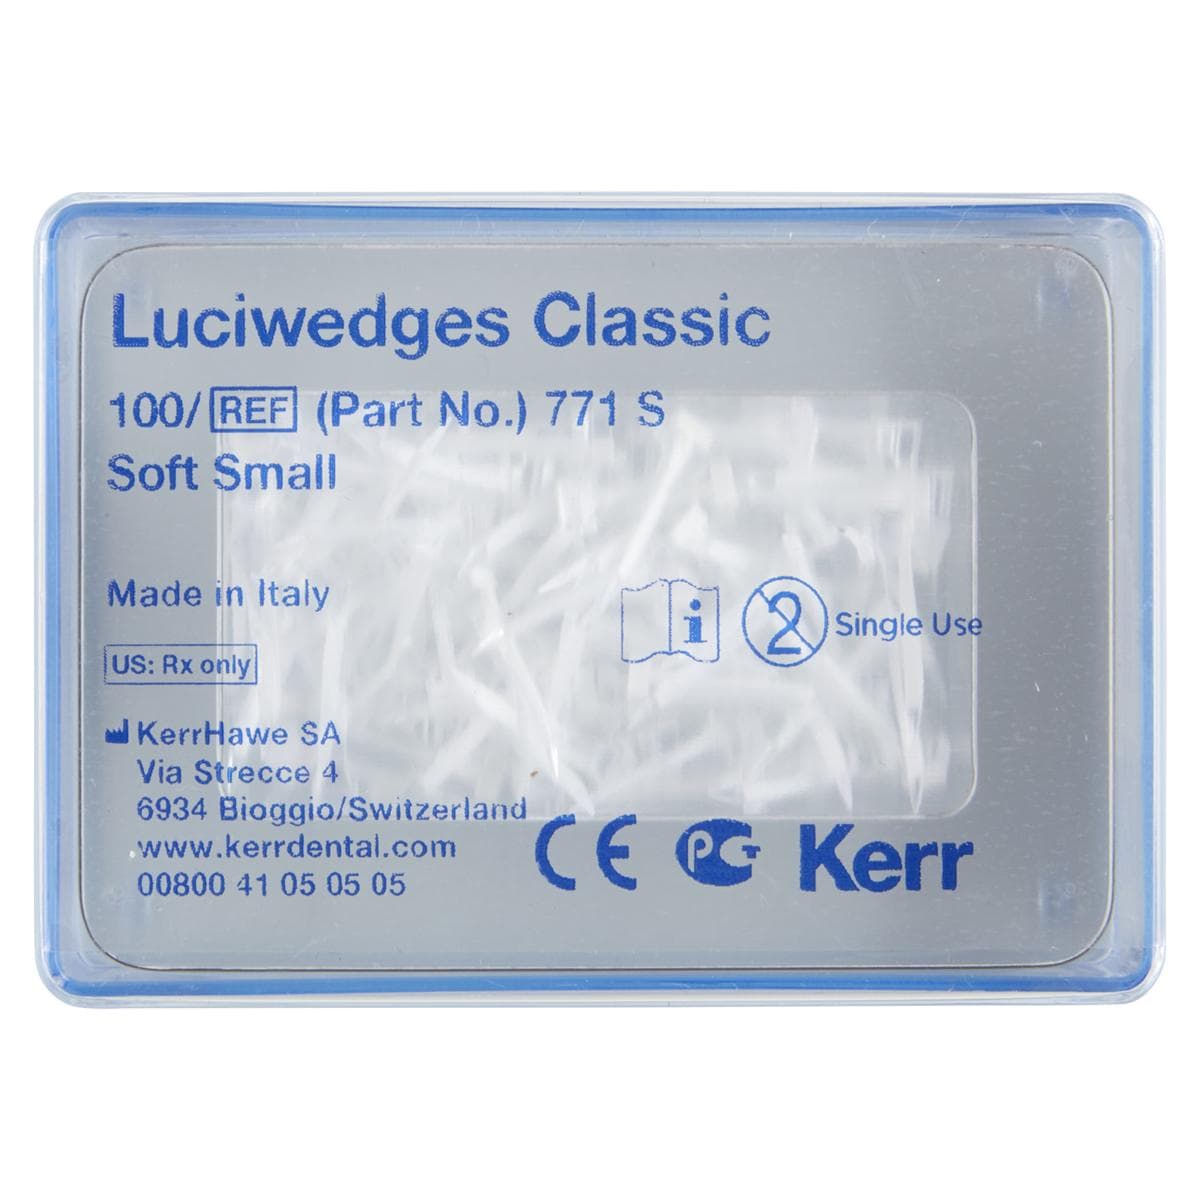 Luciwedge Soft - n 771S soft small